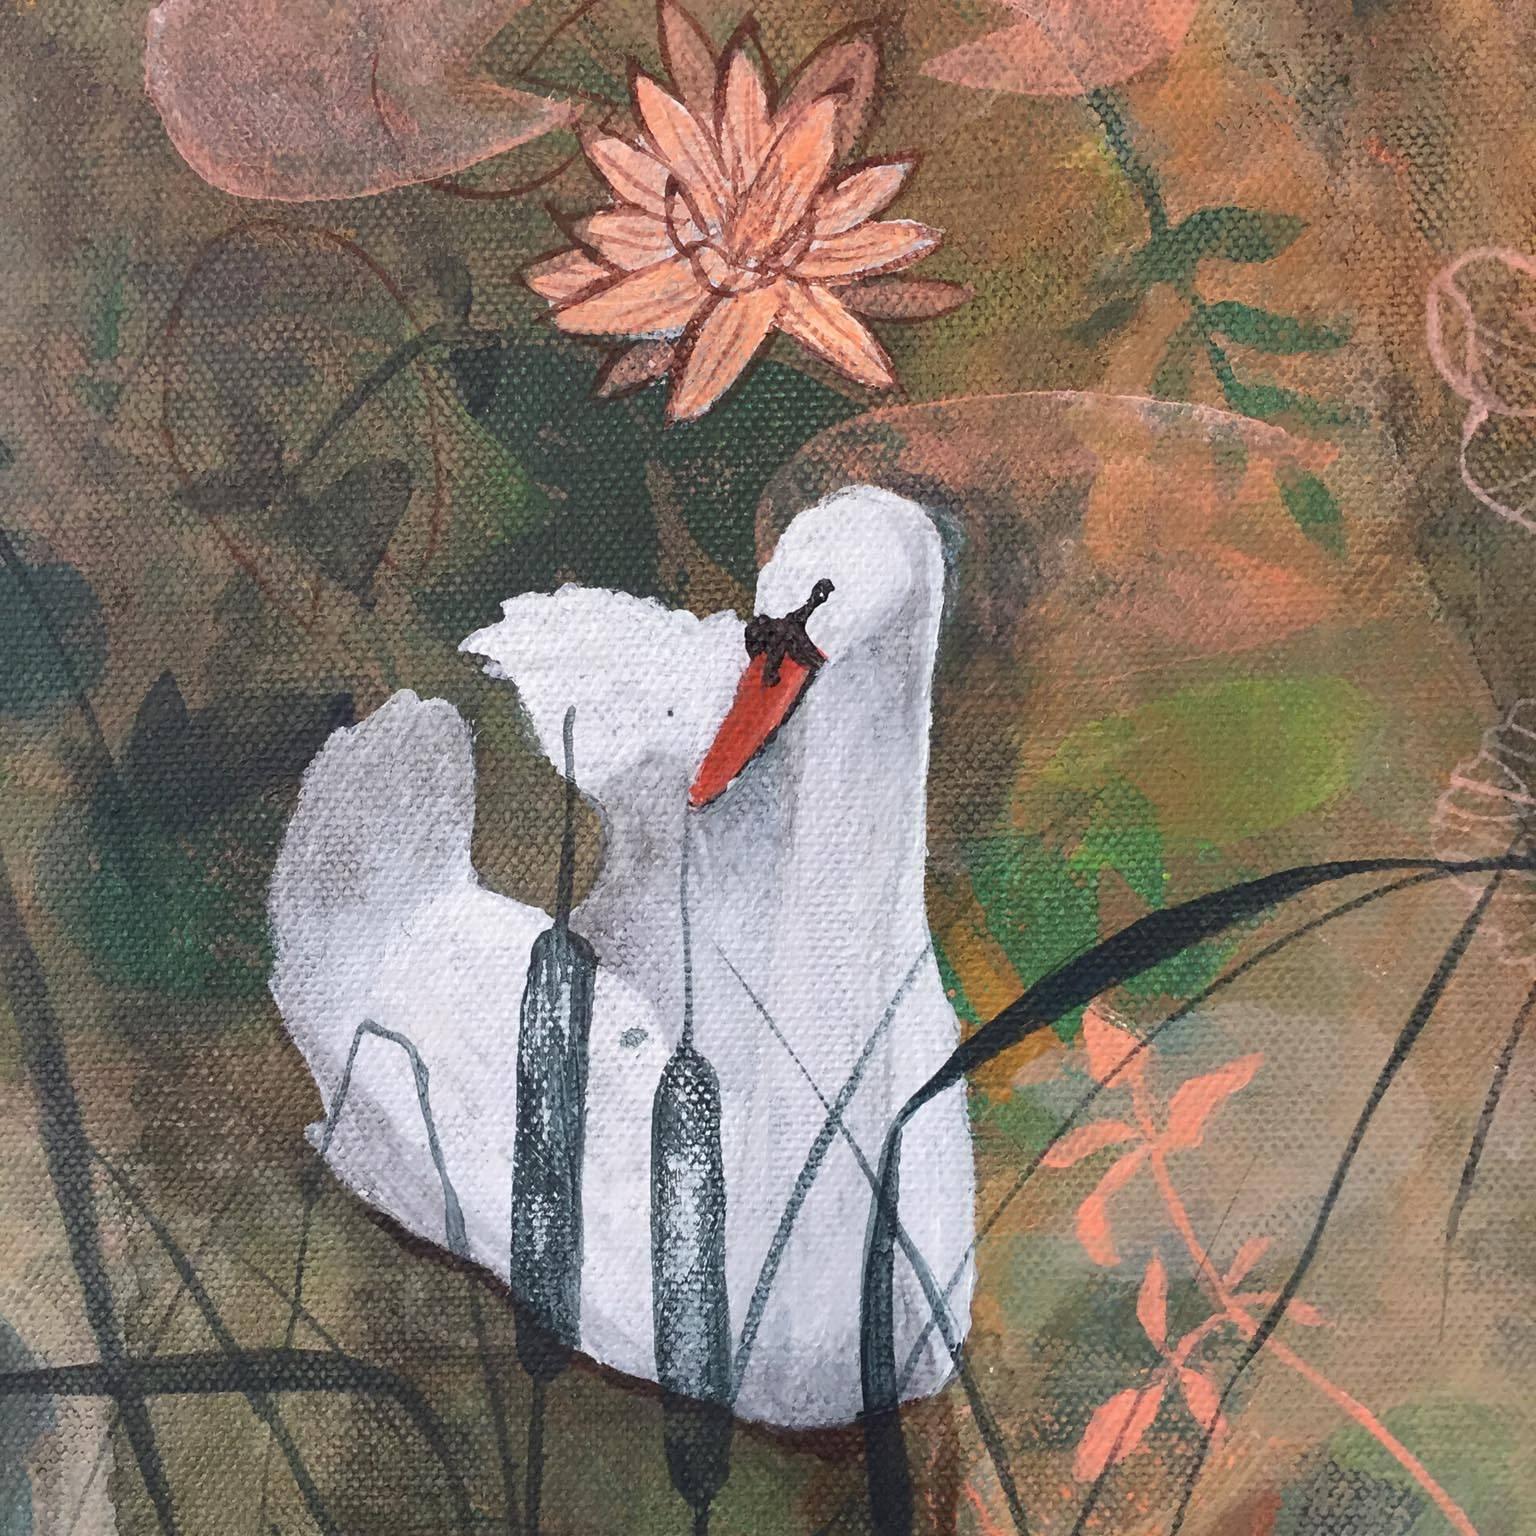 Original painting: ‘Golden Lake’ has been inspired by the swans and the wildlife in Sheffield Park and has been painted by contemporary artist, Dawn Stacey. She has used bright and light oranges and greens and pink colours within this painting to